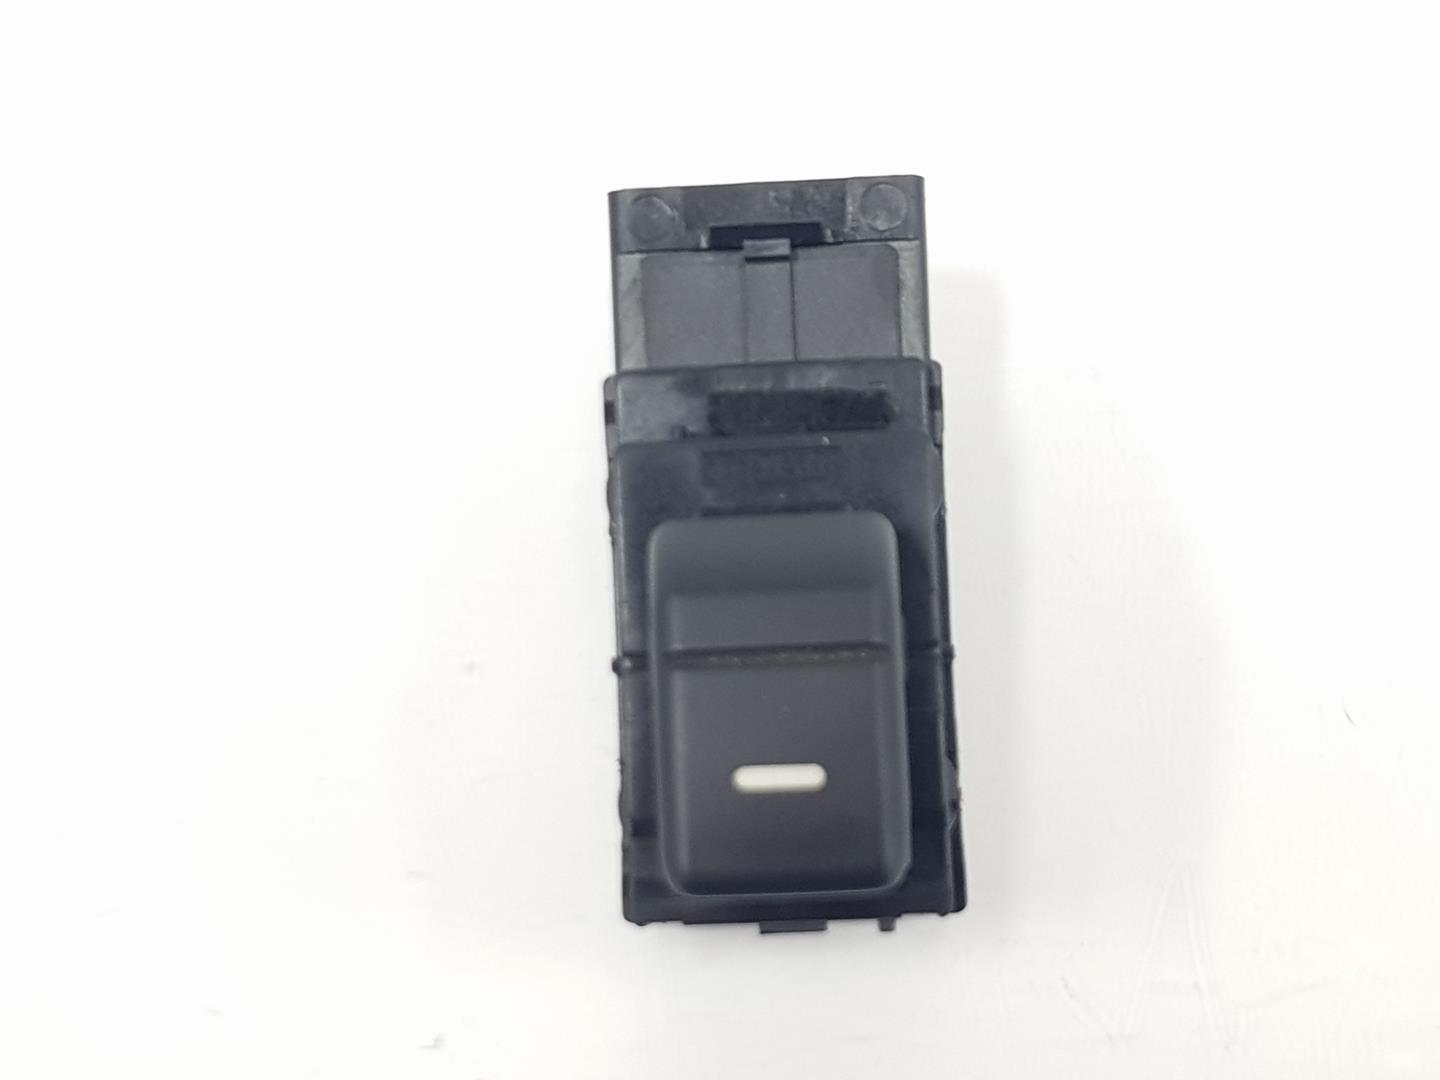 LAND ROVER Discovery 4 generation (2009-2016) Front Right Door Window Switch YUD501070PVJ, 5H2214K147ACA8PVJ 19875007